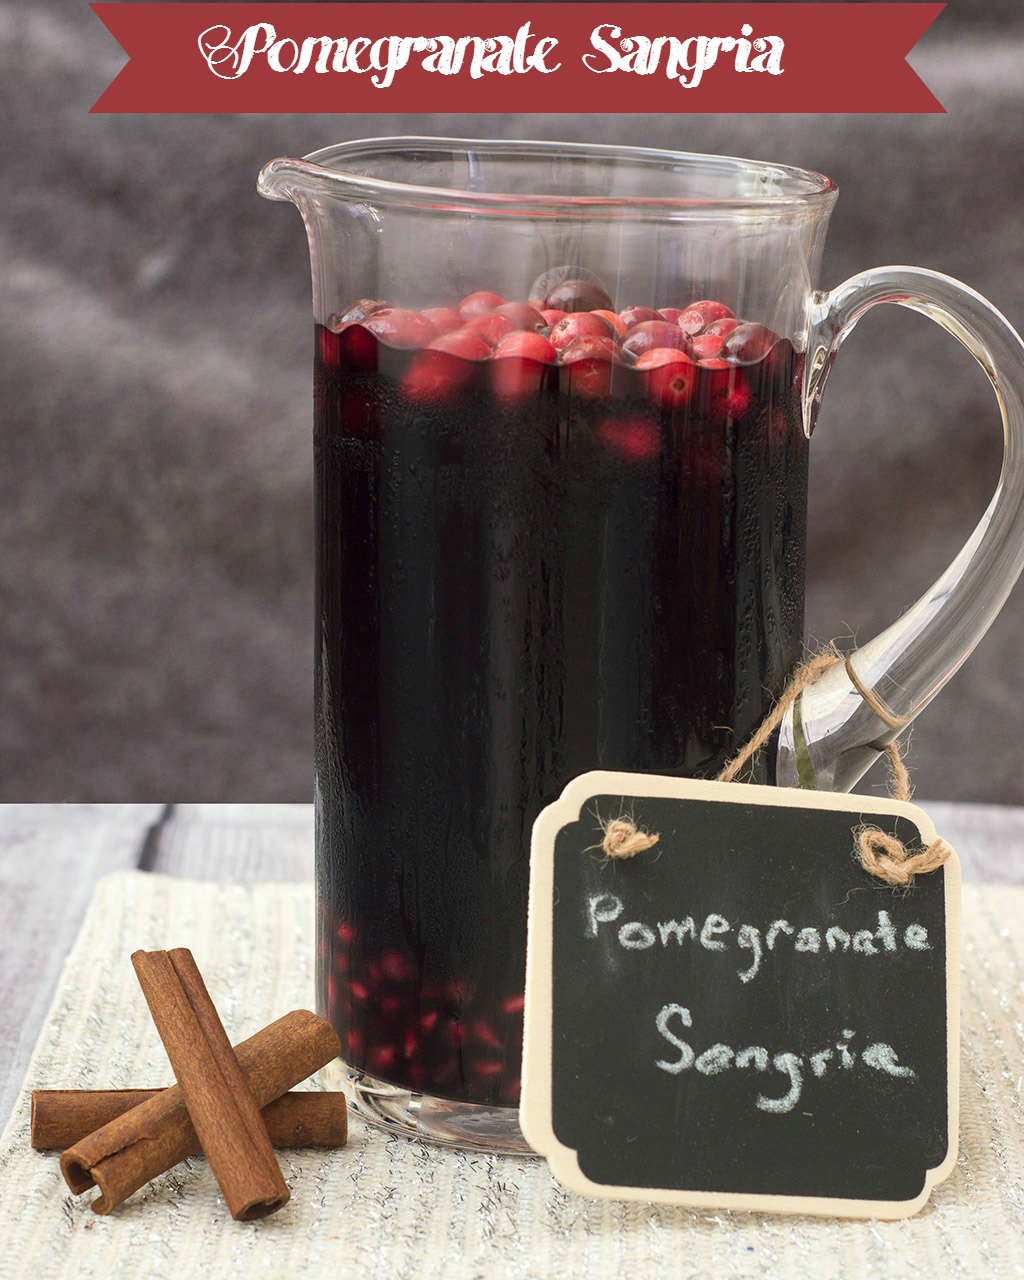 Pomegranate sangria combines fruity red wine with pomegranate and cranberry, with cinnamon for a hint of spice. Make a large batch a day ahead for a winning party cocktail! #SundaySupper TheRedheadBaker.com